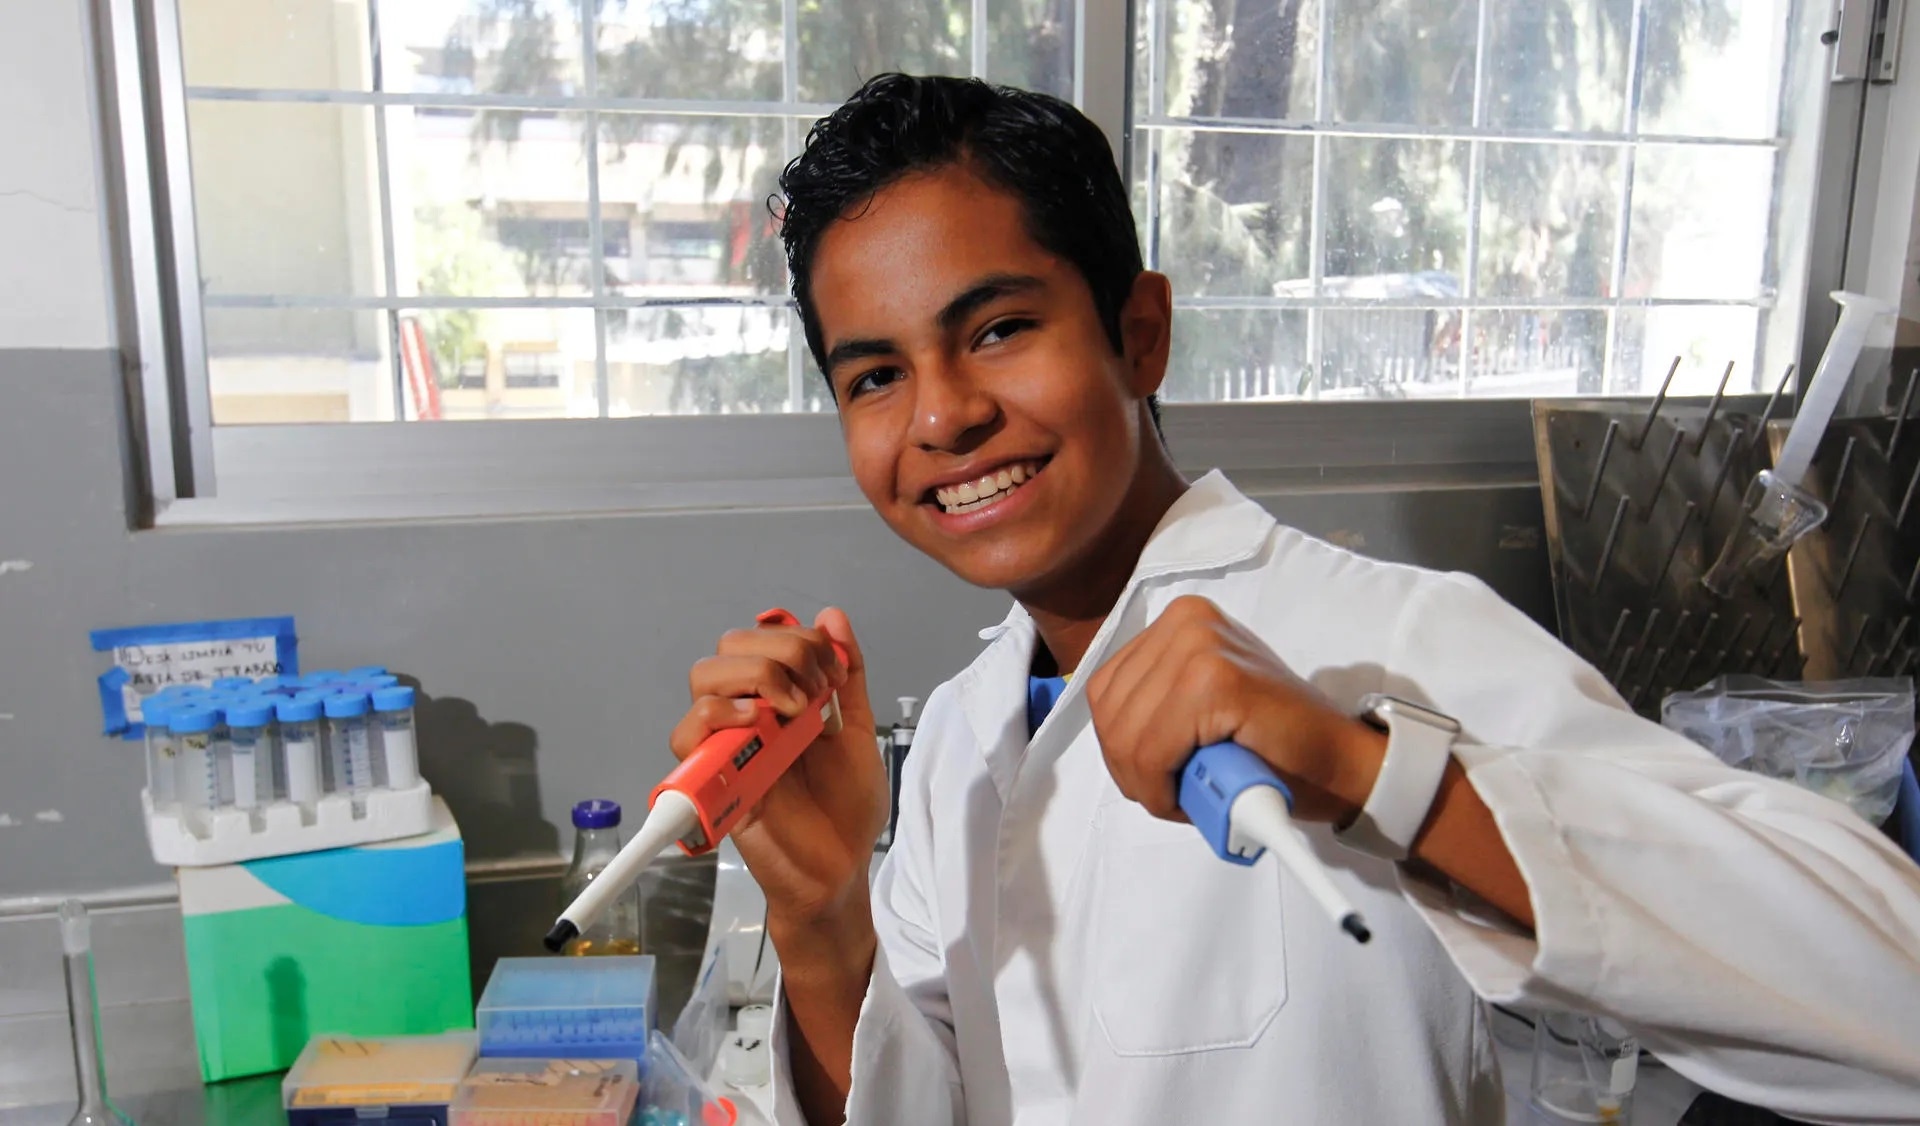 12 year old teenager at Mexico became the worlds youngest molecular biologist